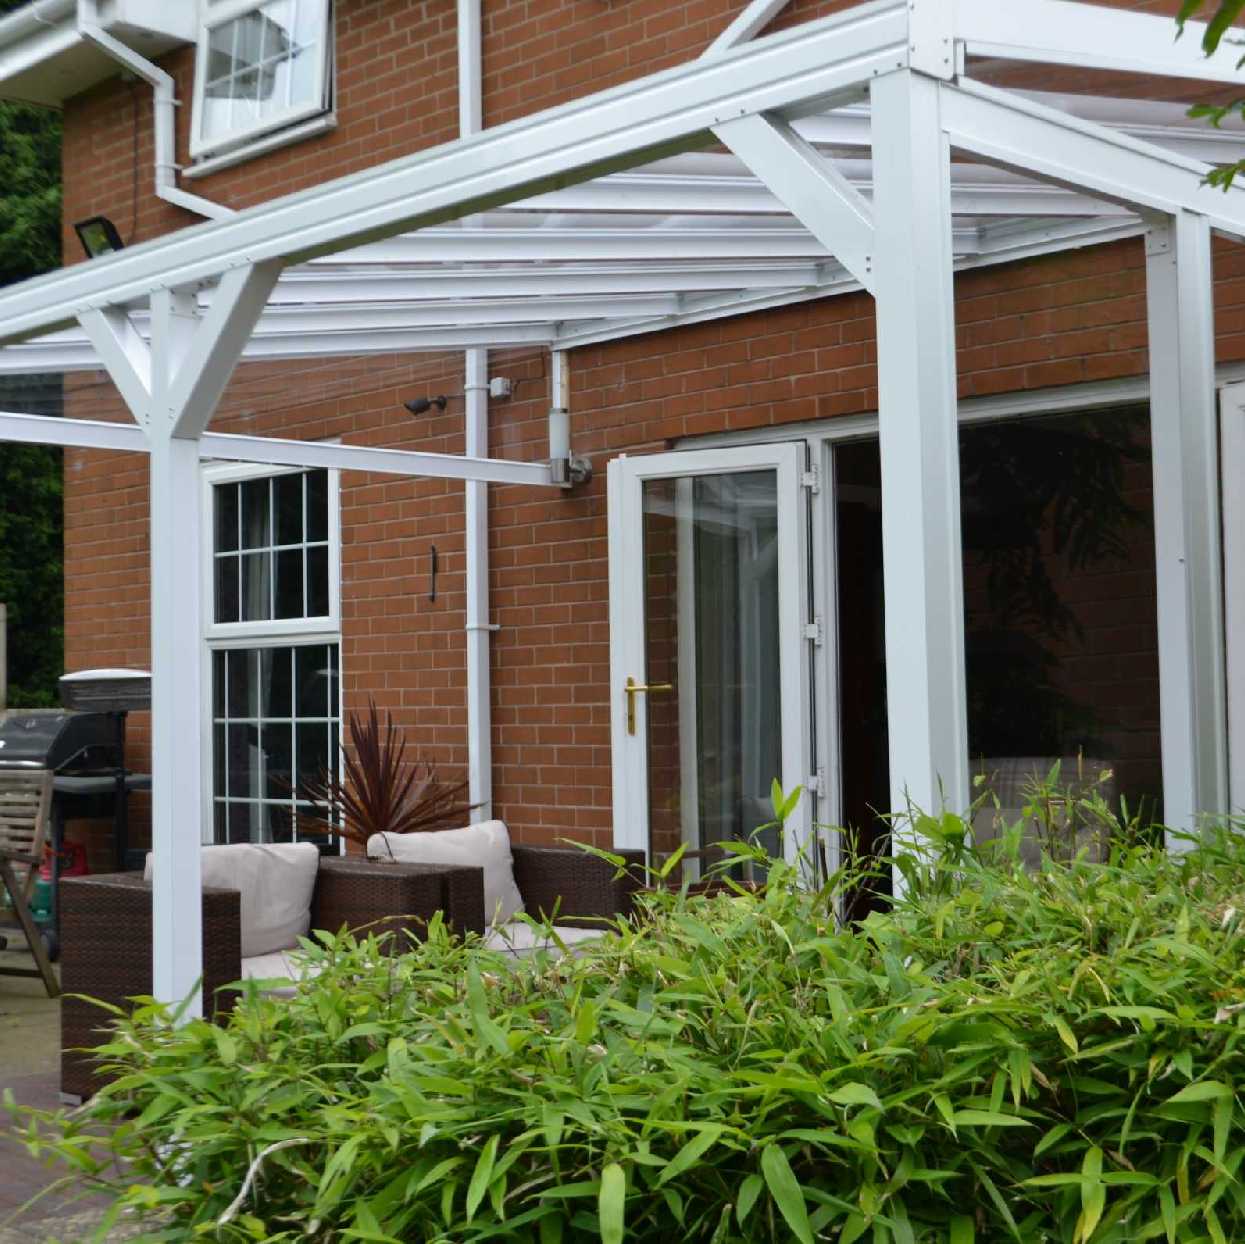 Omega Smart Lean-To Canopy, White with 6mm Glass Clear Plate Polycarbonate Glazing - 9.0m (W) x 4.0m (P), (4) Supporting Posts from Omega Build